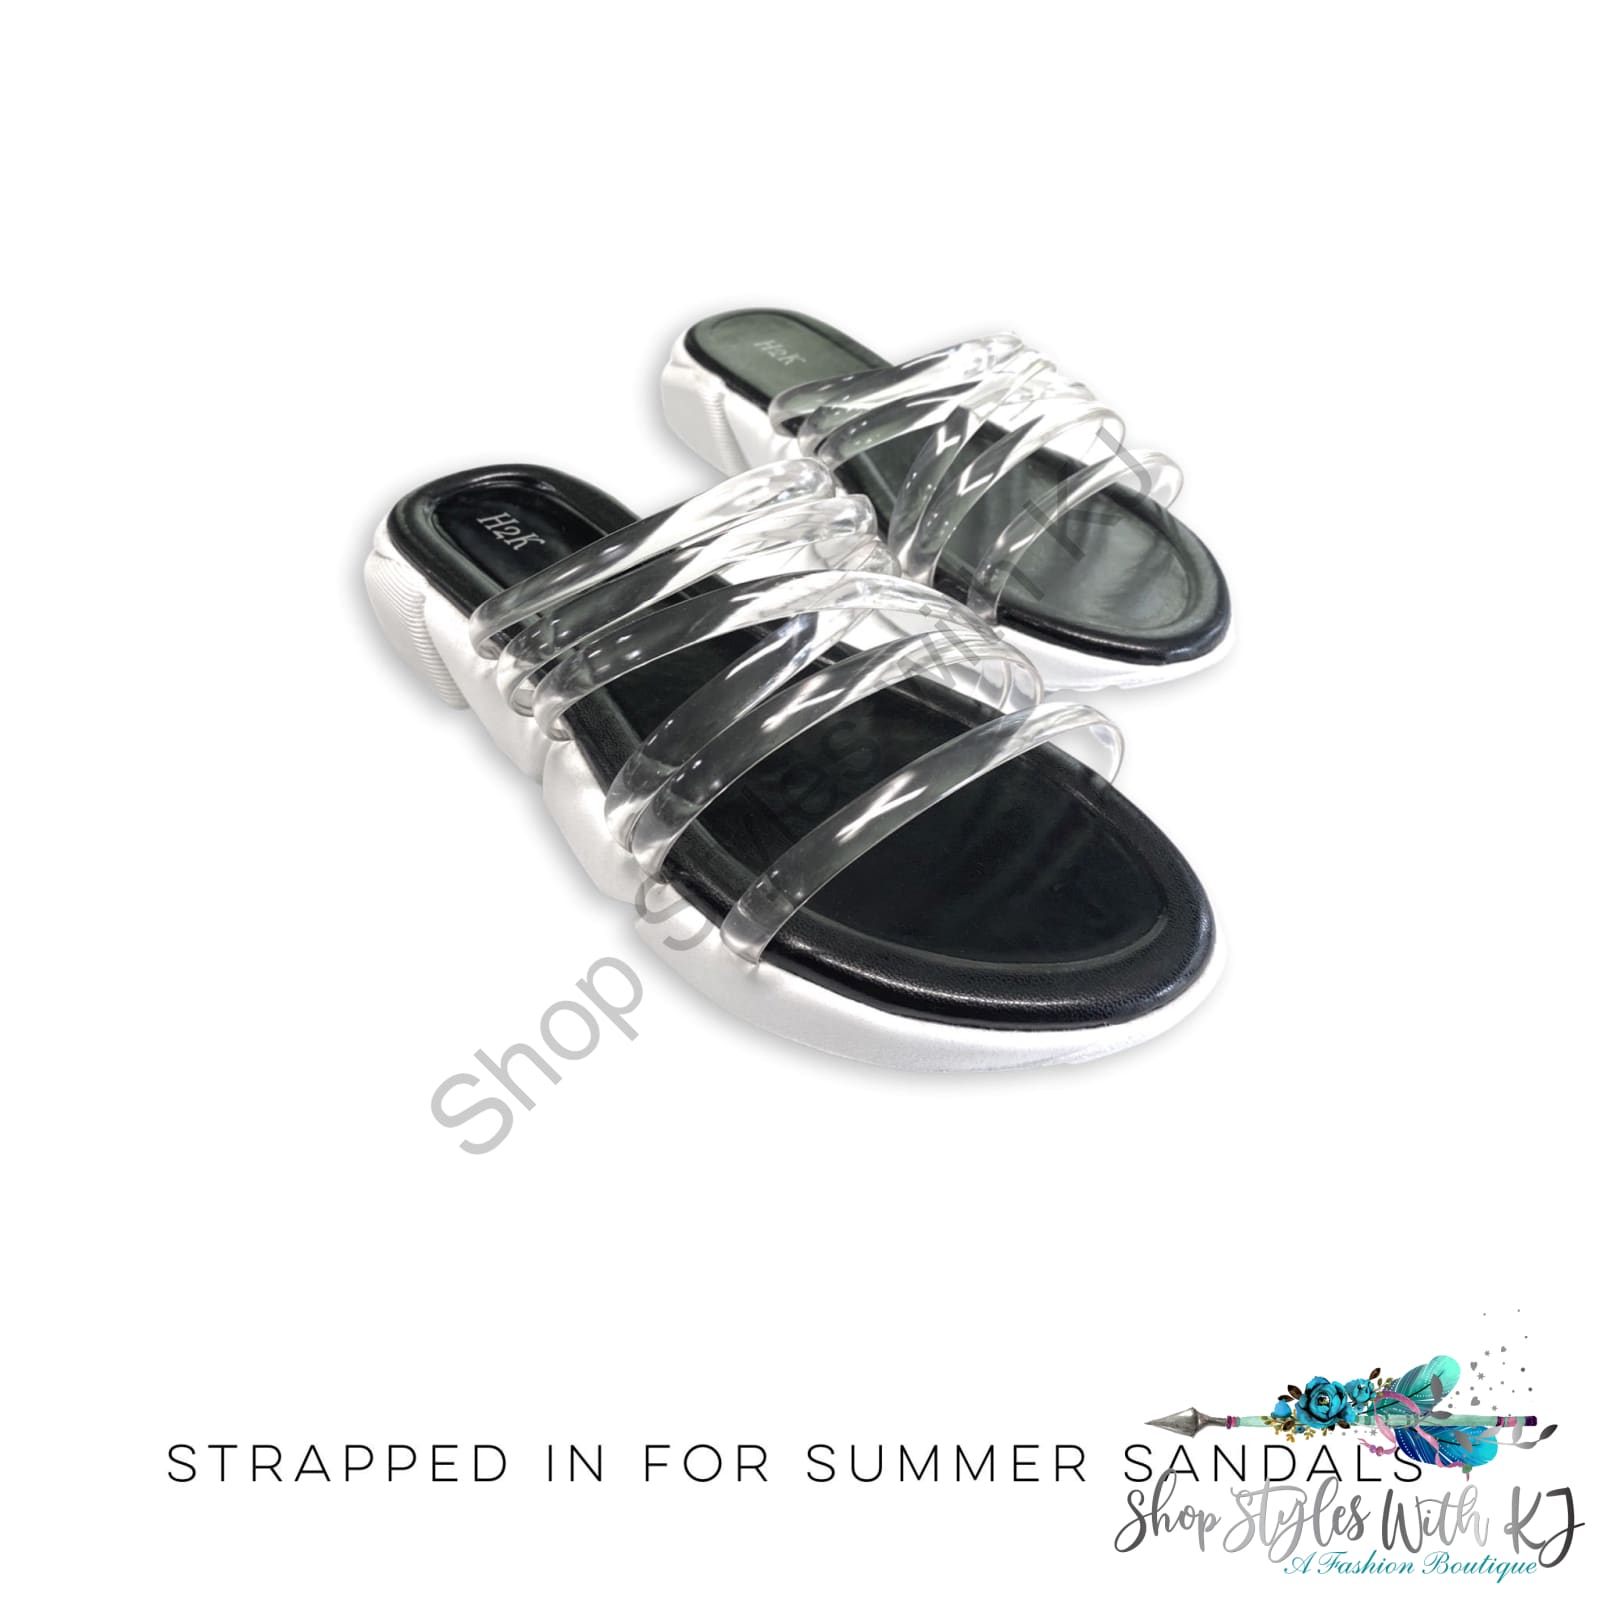 Strapped In For Summer Sandals H2K